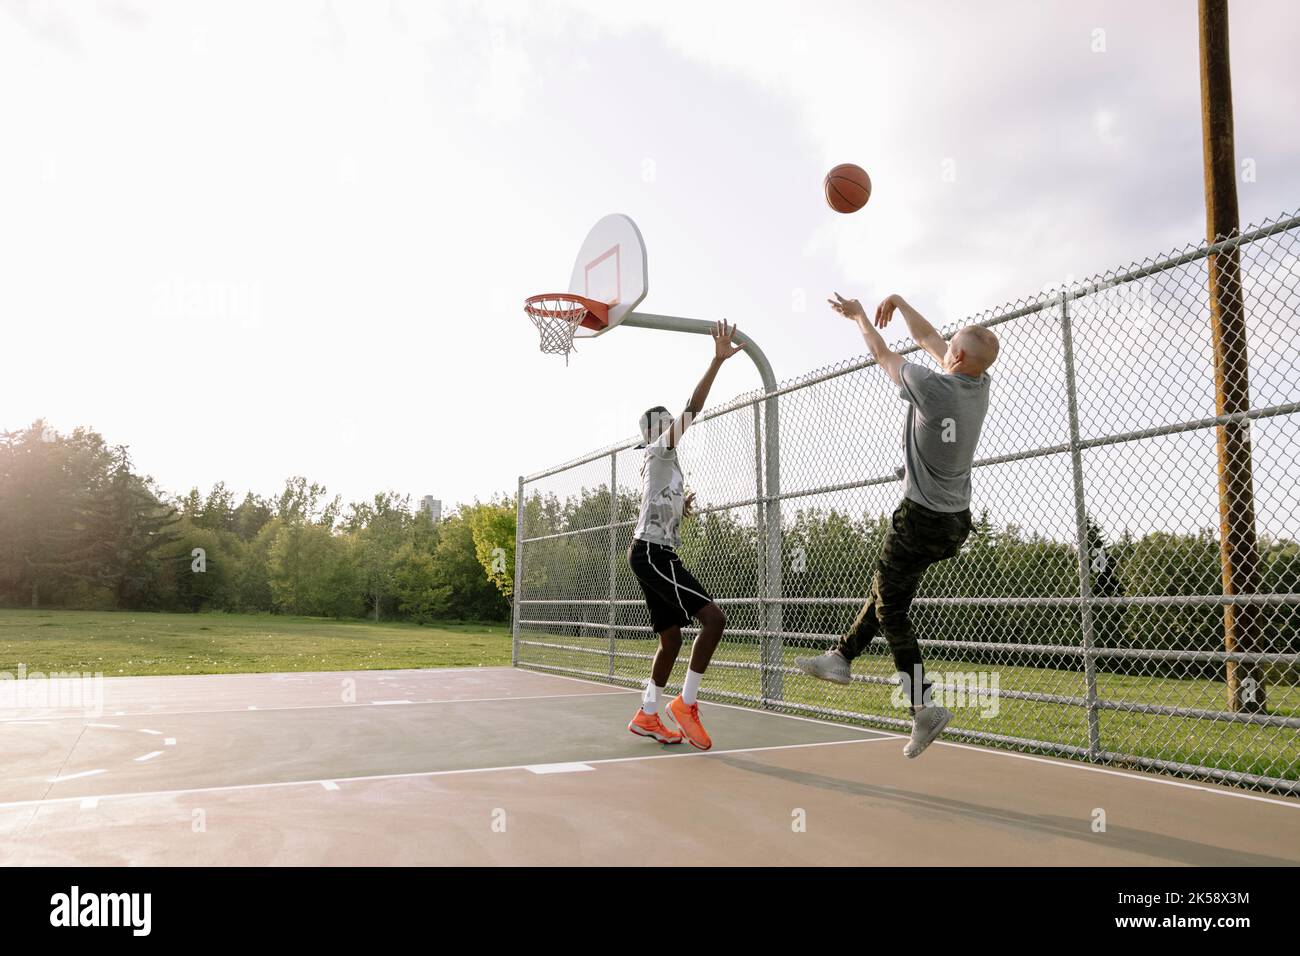 Basketball player aiming to score goal with opponent jumping to defend Stock Photo